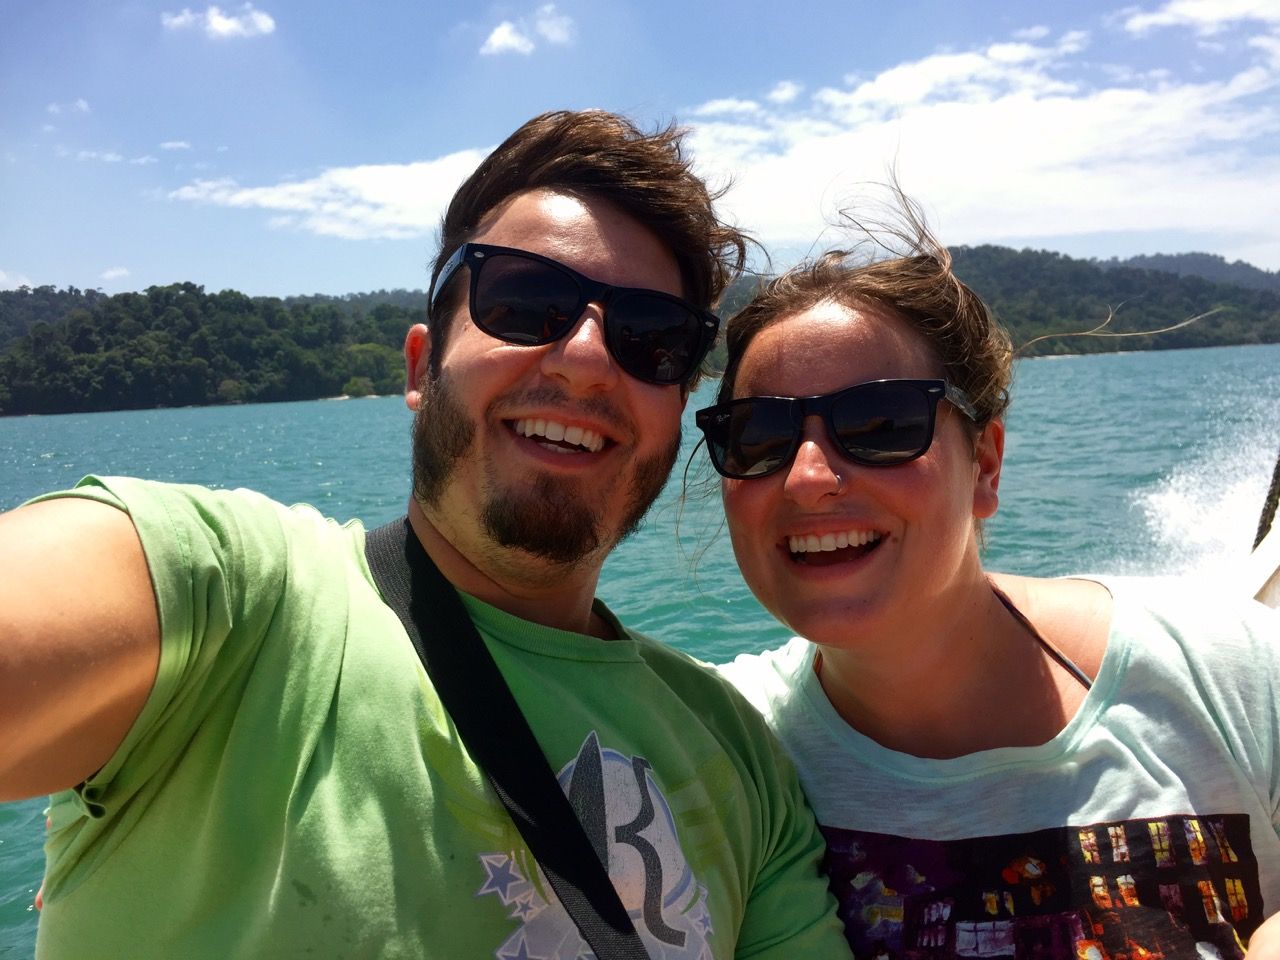 Chris and Karin on a boat in Malaysia.